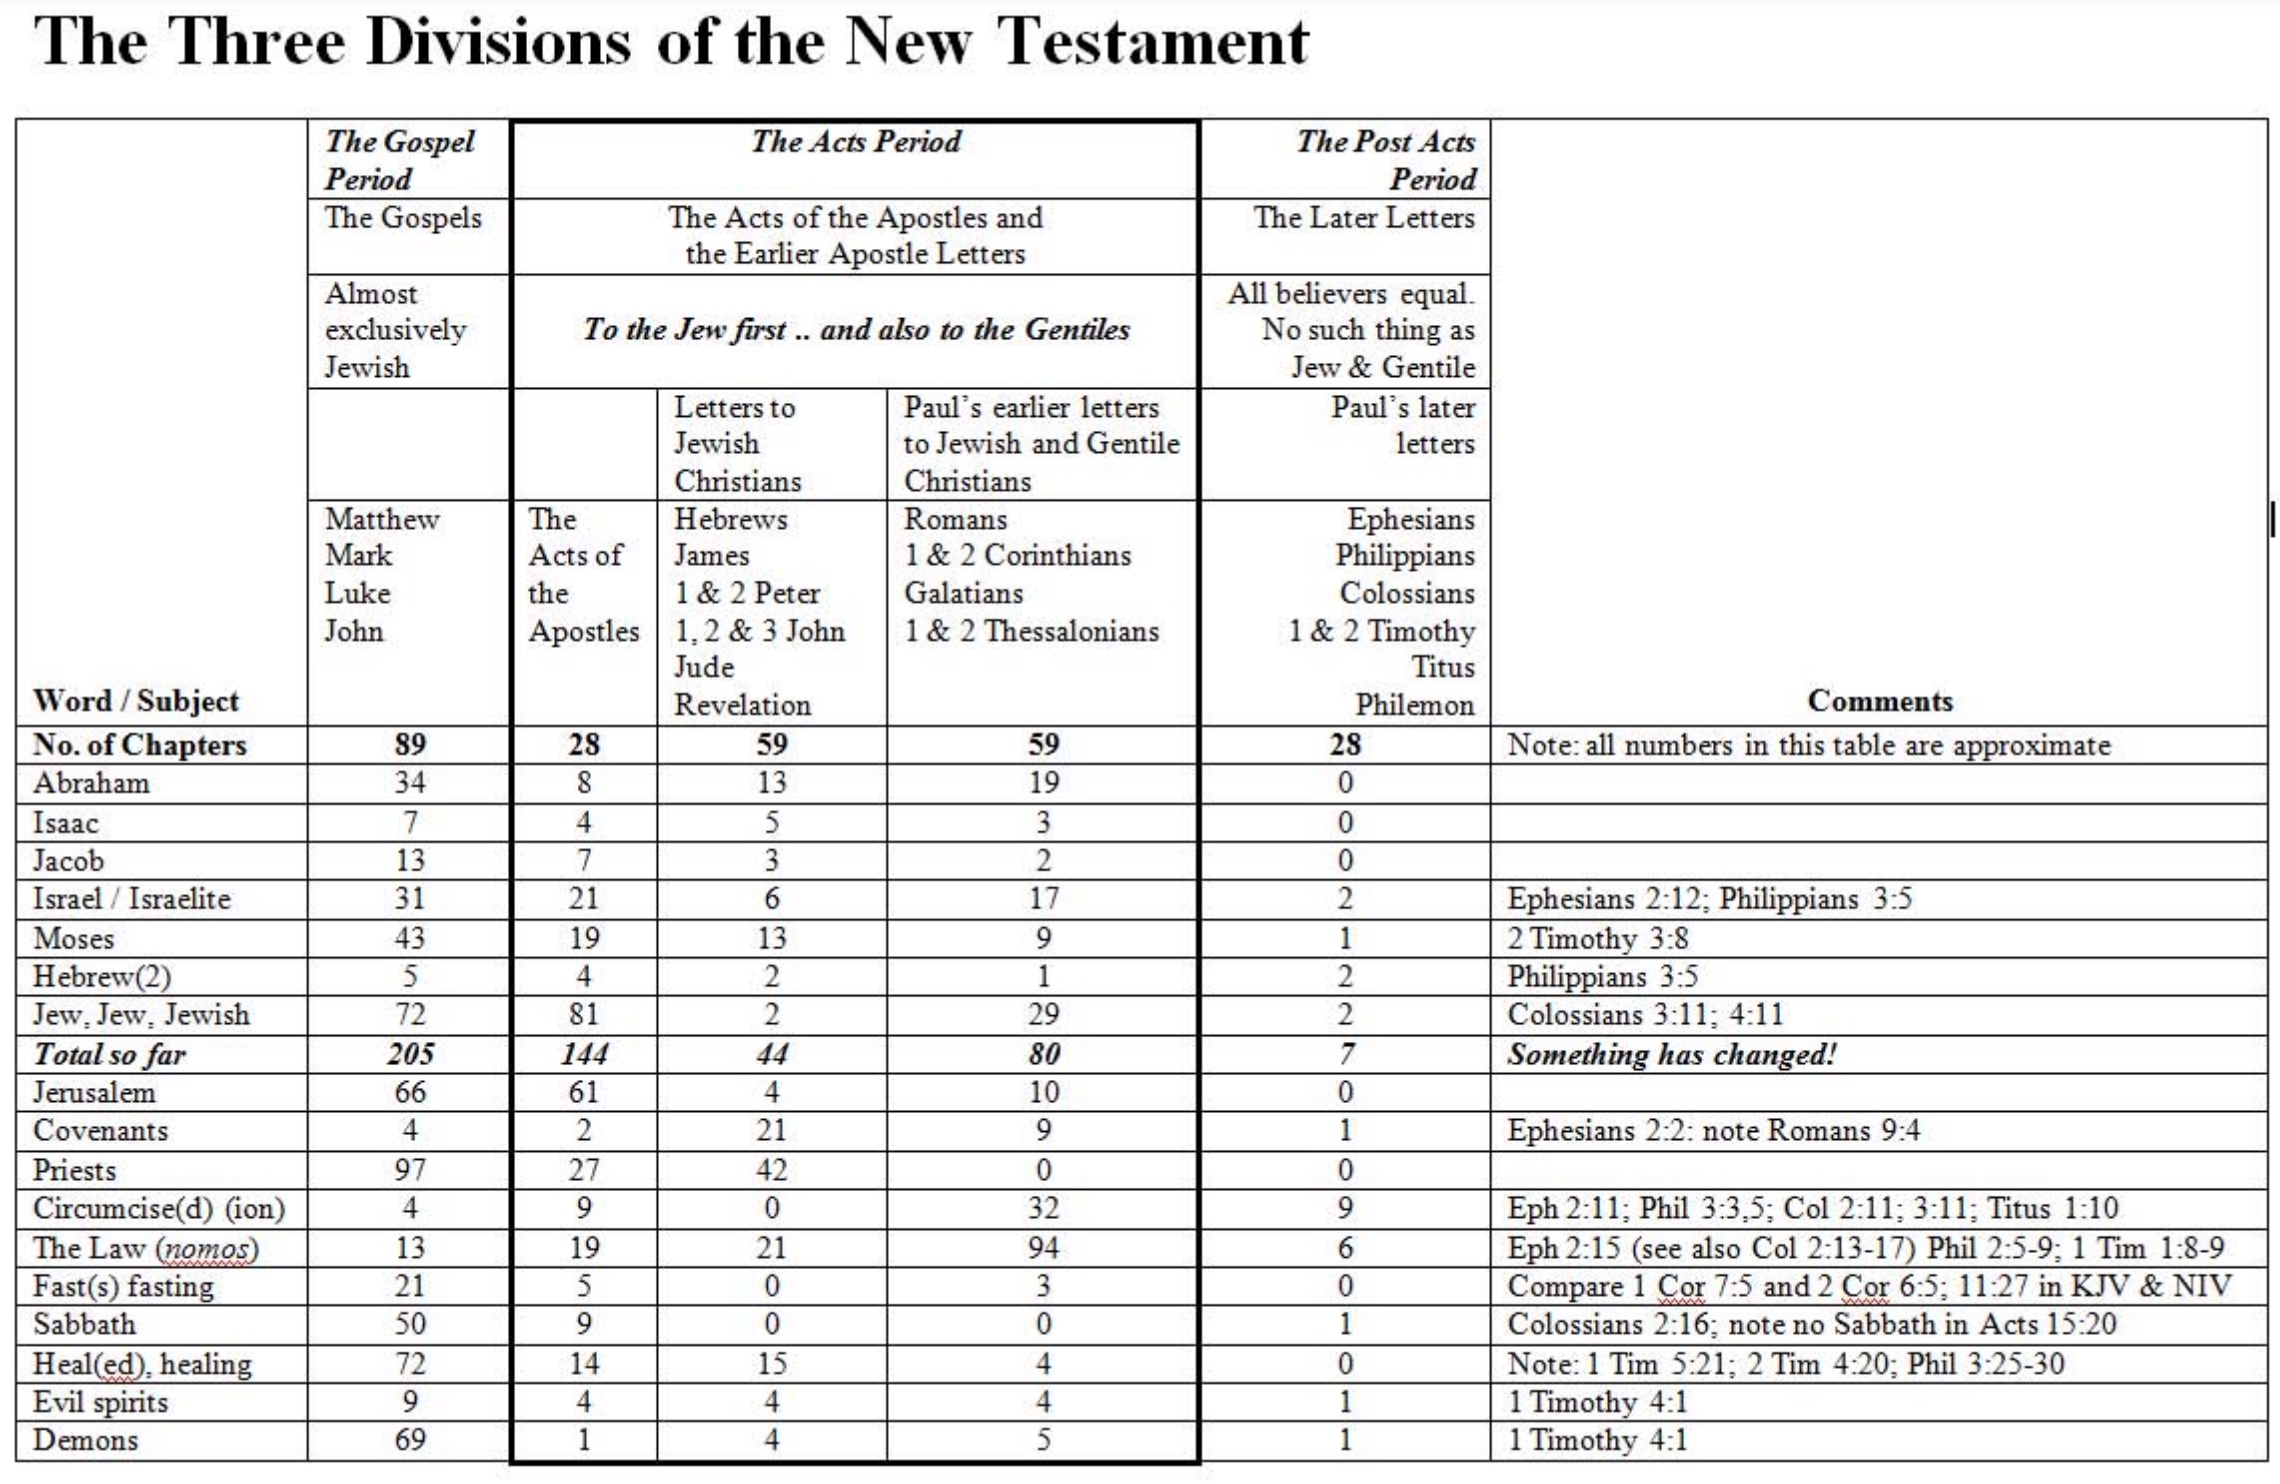 Interesting Statisics in the New Testament